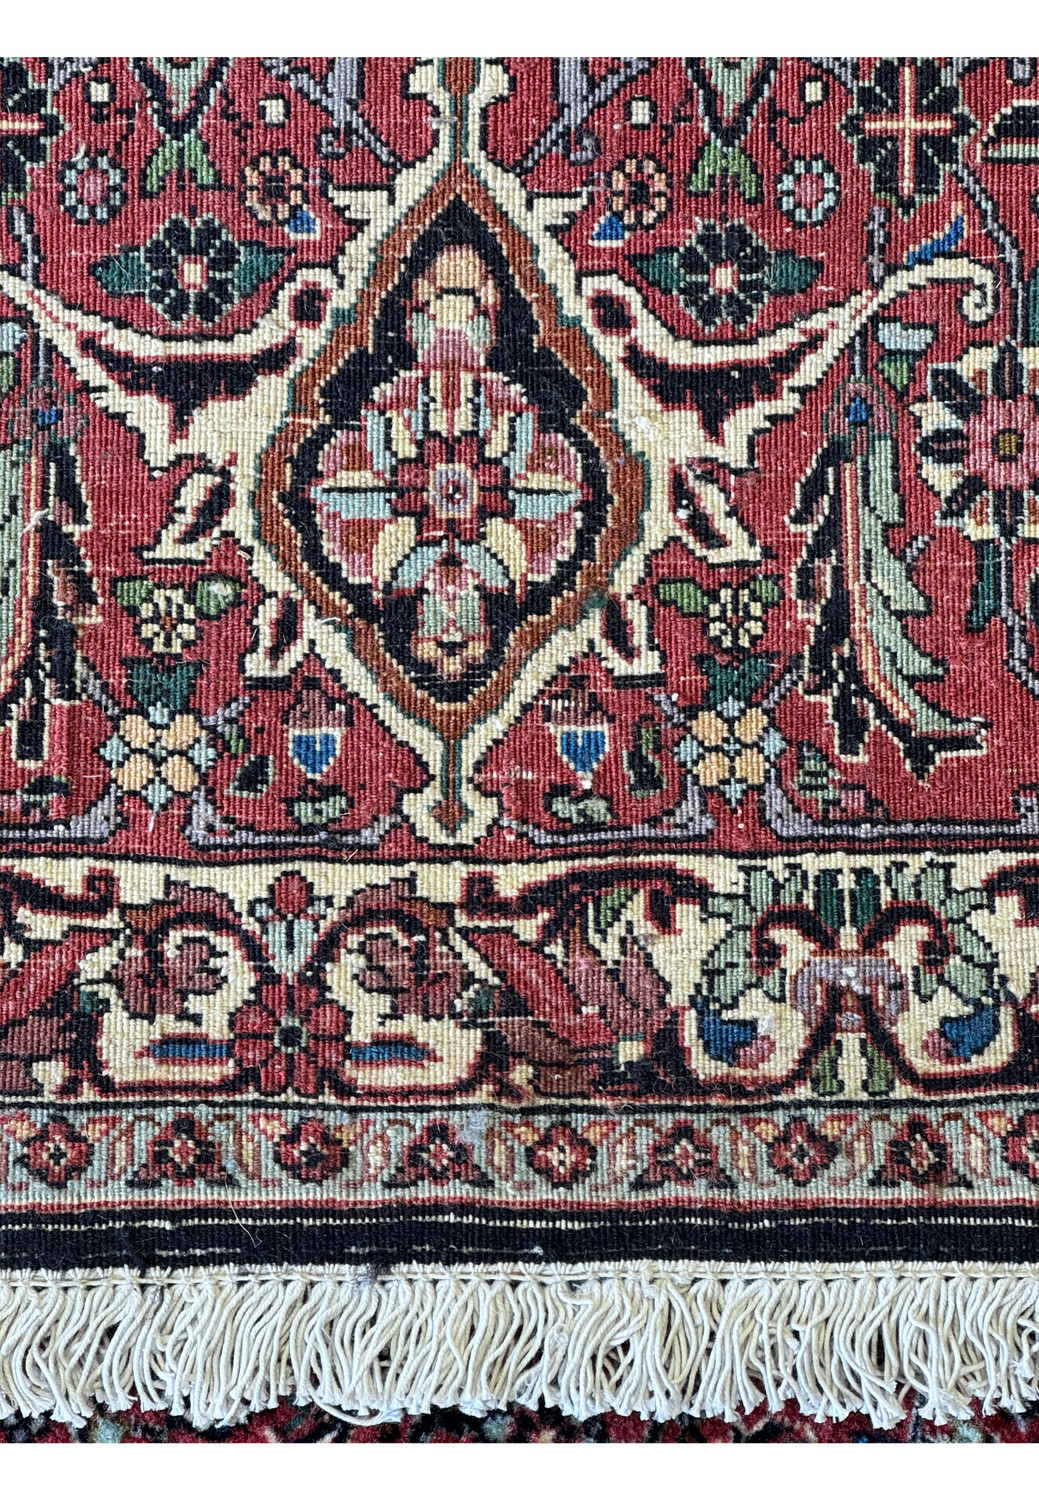 Zoomed-in view of the backside of a Persian Bidjar rug, showcasing the tight weave and exceptional knot quality that contribute to its designation as a high-quality wool rug